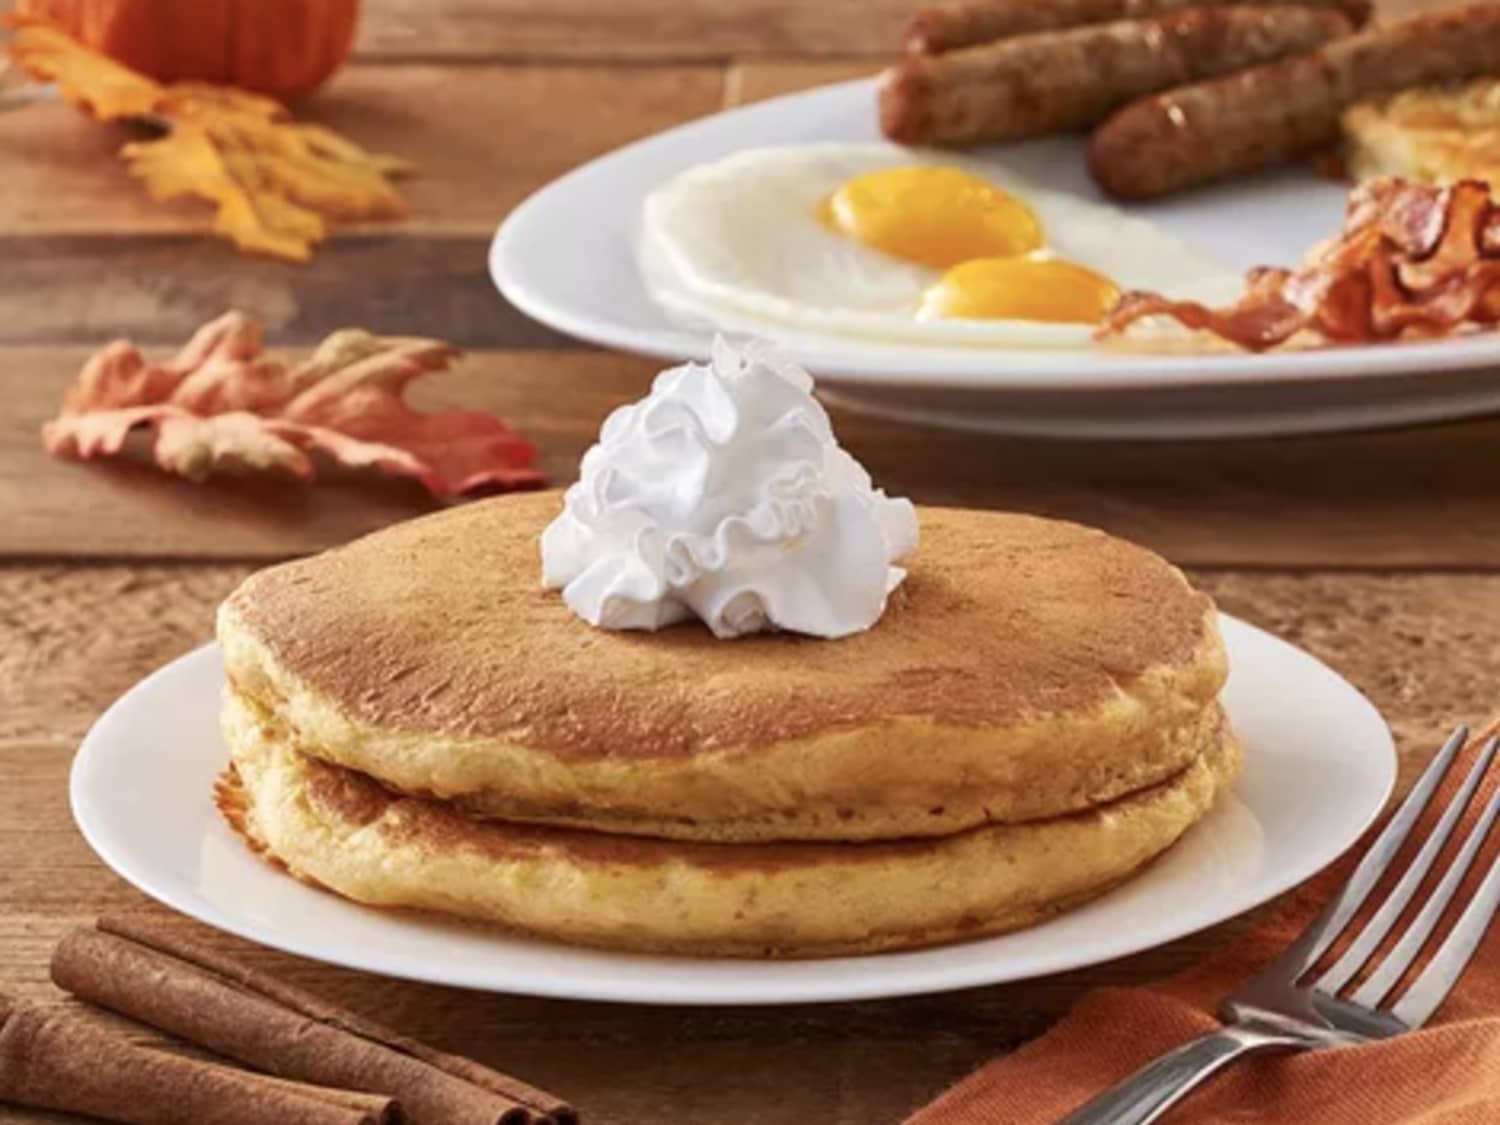 IHOP Brings Back Pumpkin Spice and Scary Face Pancakes